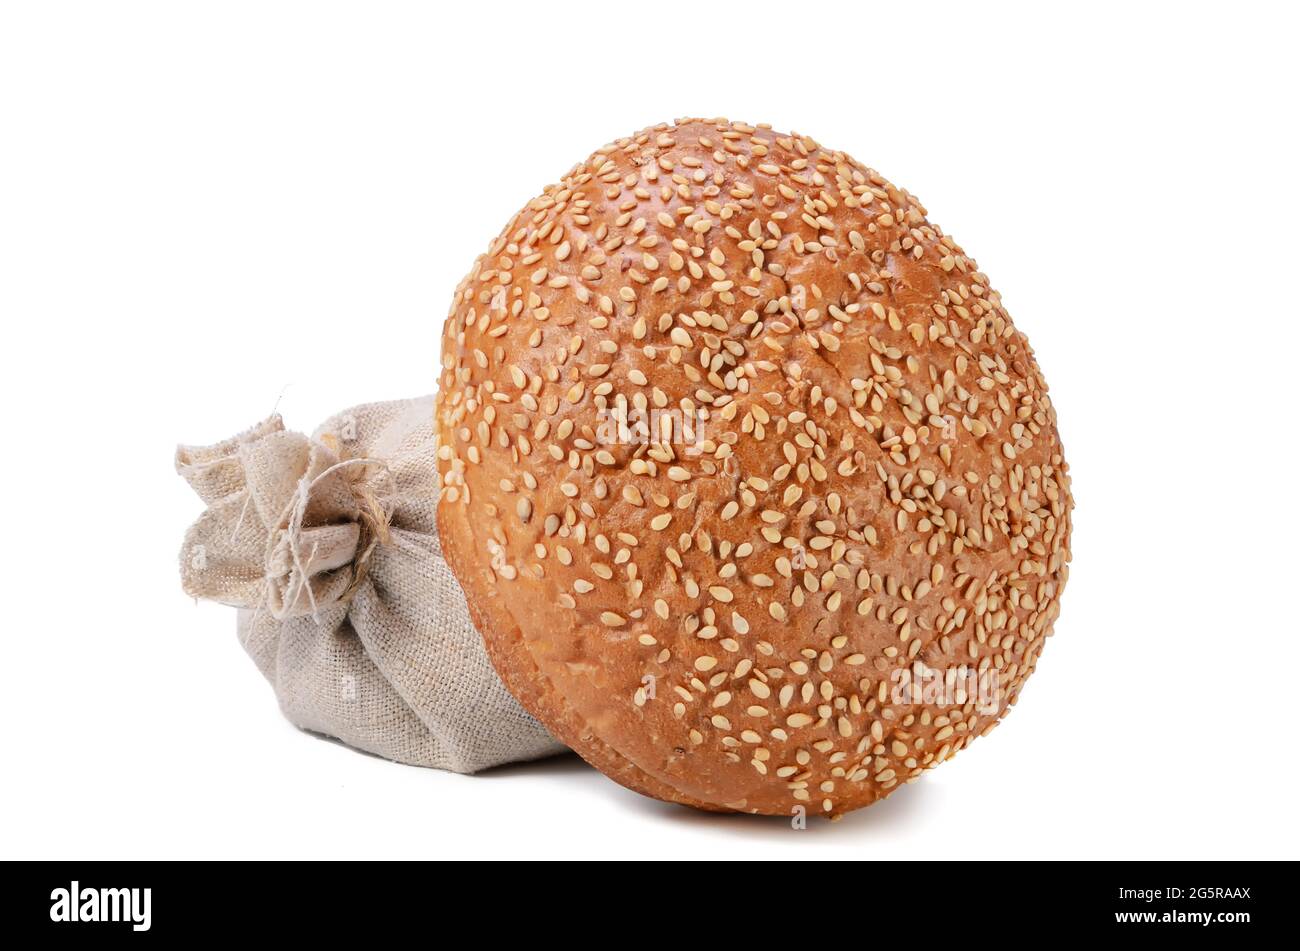 fresh bun, sprinkled with sesame seeds on a white background with soft shadow Stock Photo